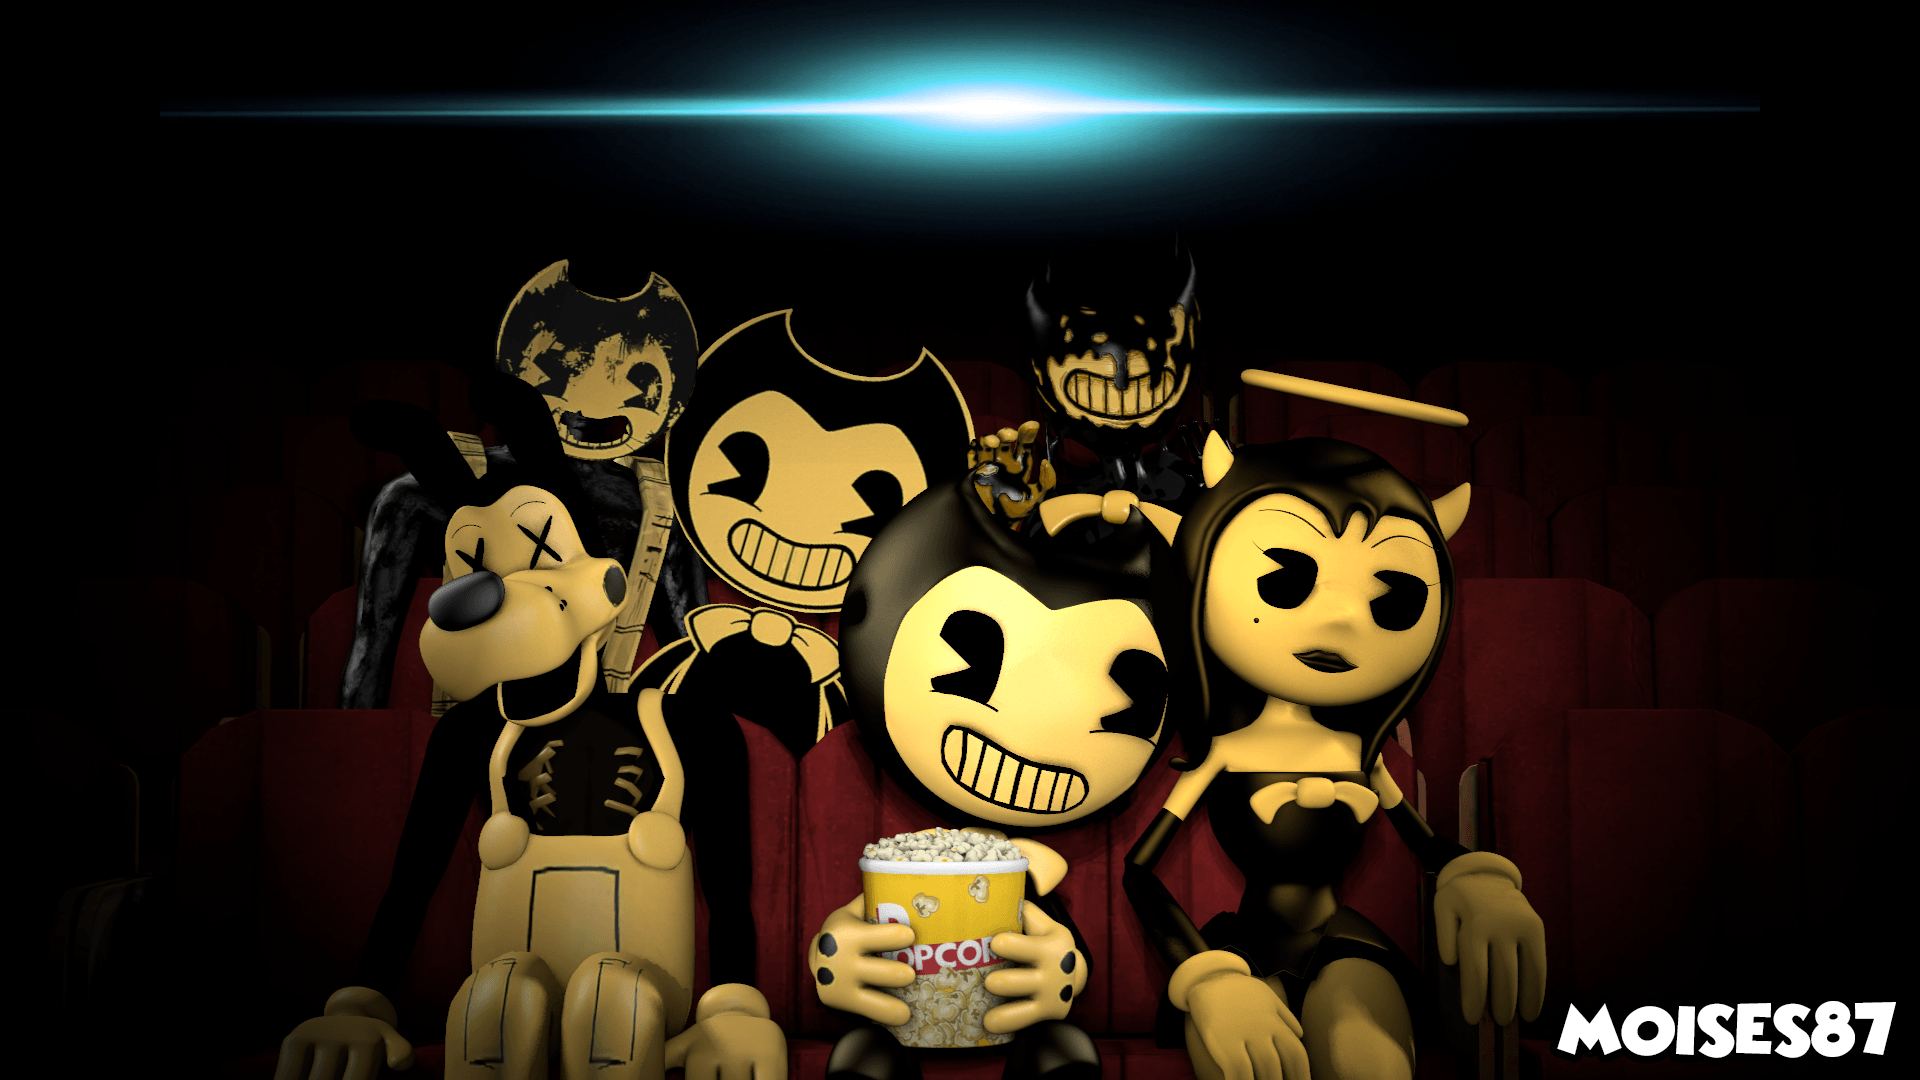 Bendy and the Ink machine Wallpaper [SFM] by Moises87. agus